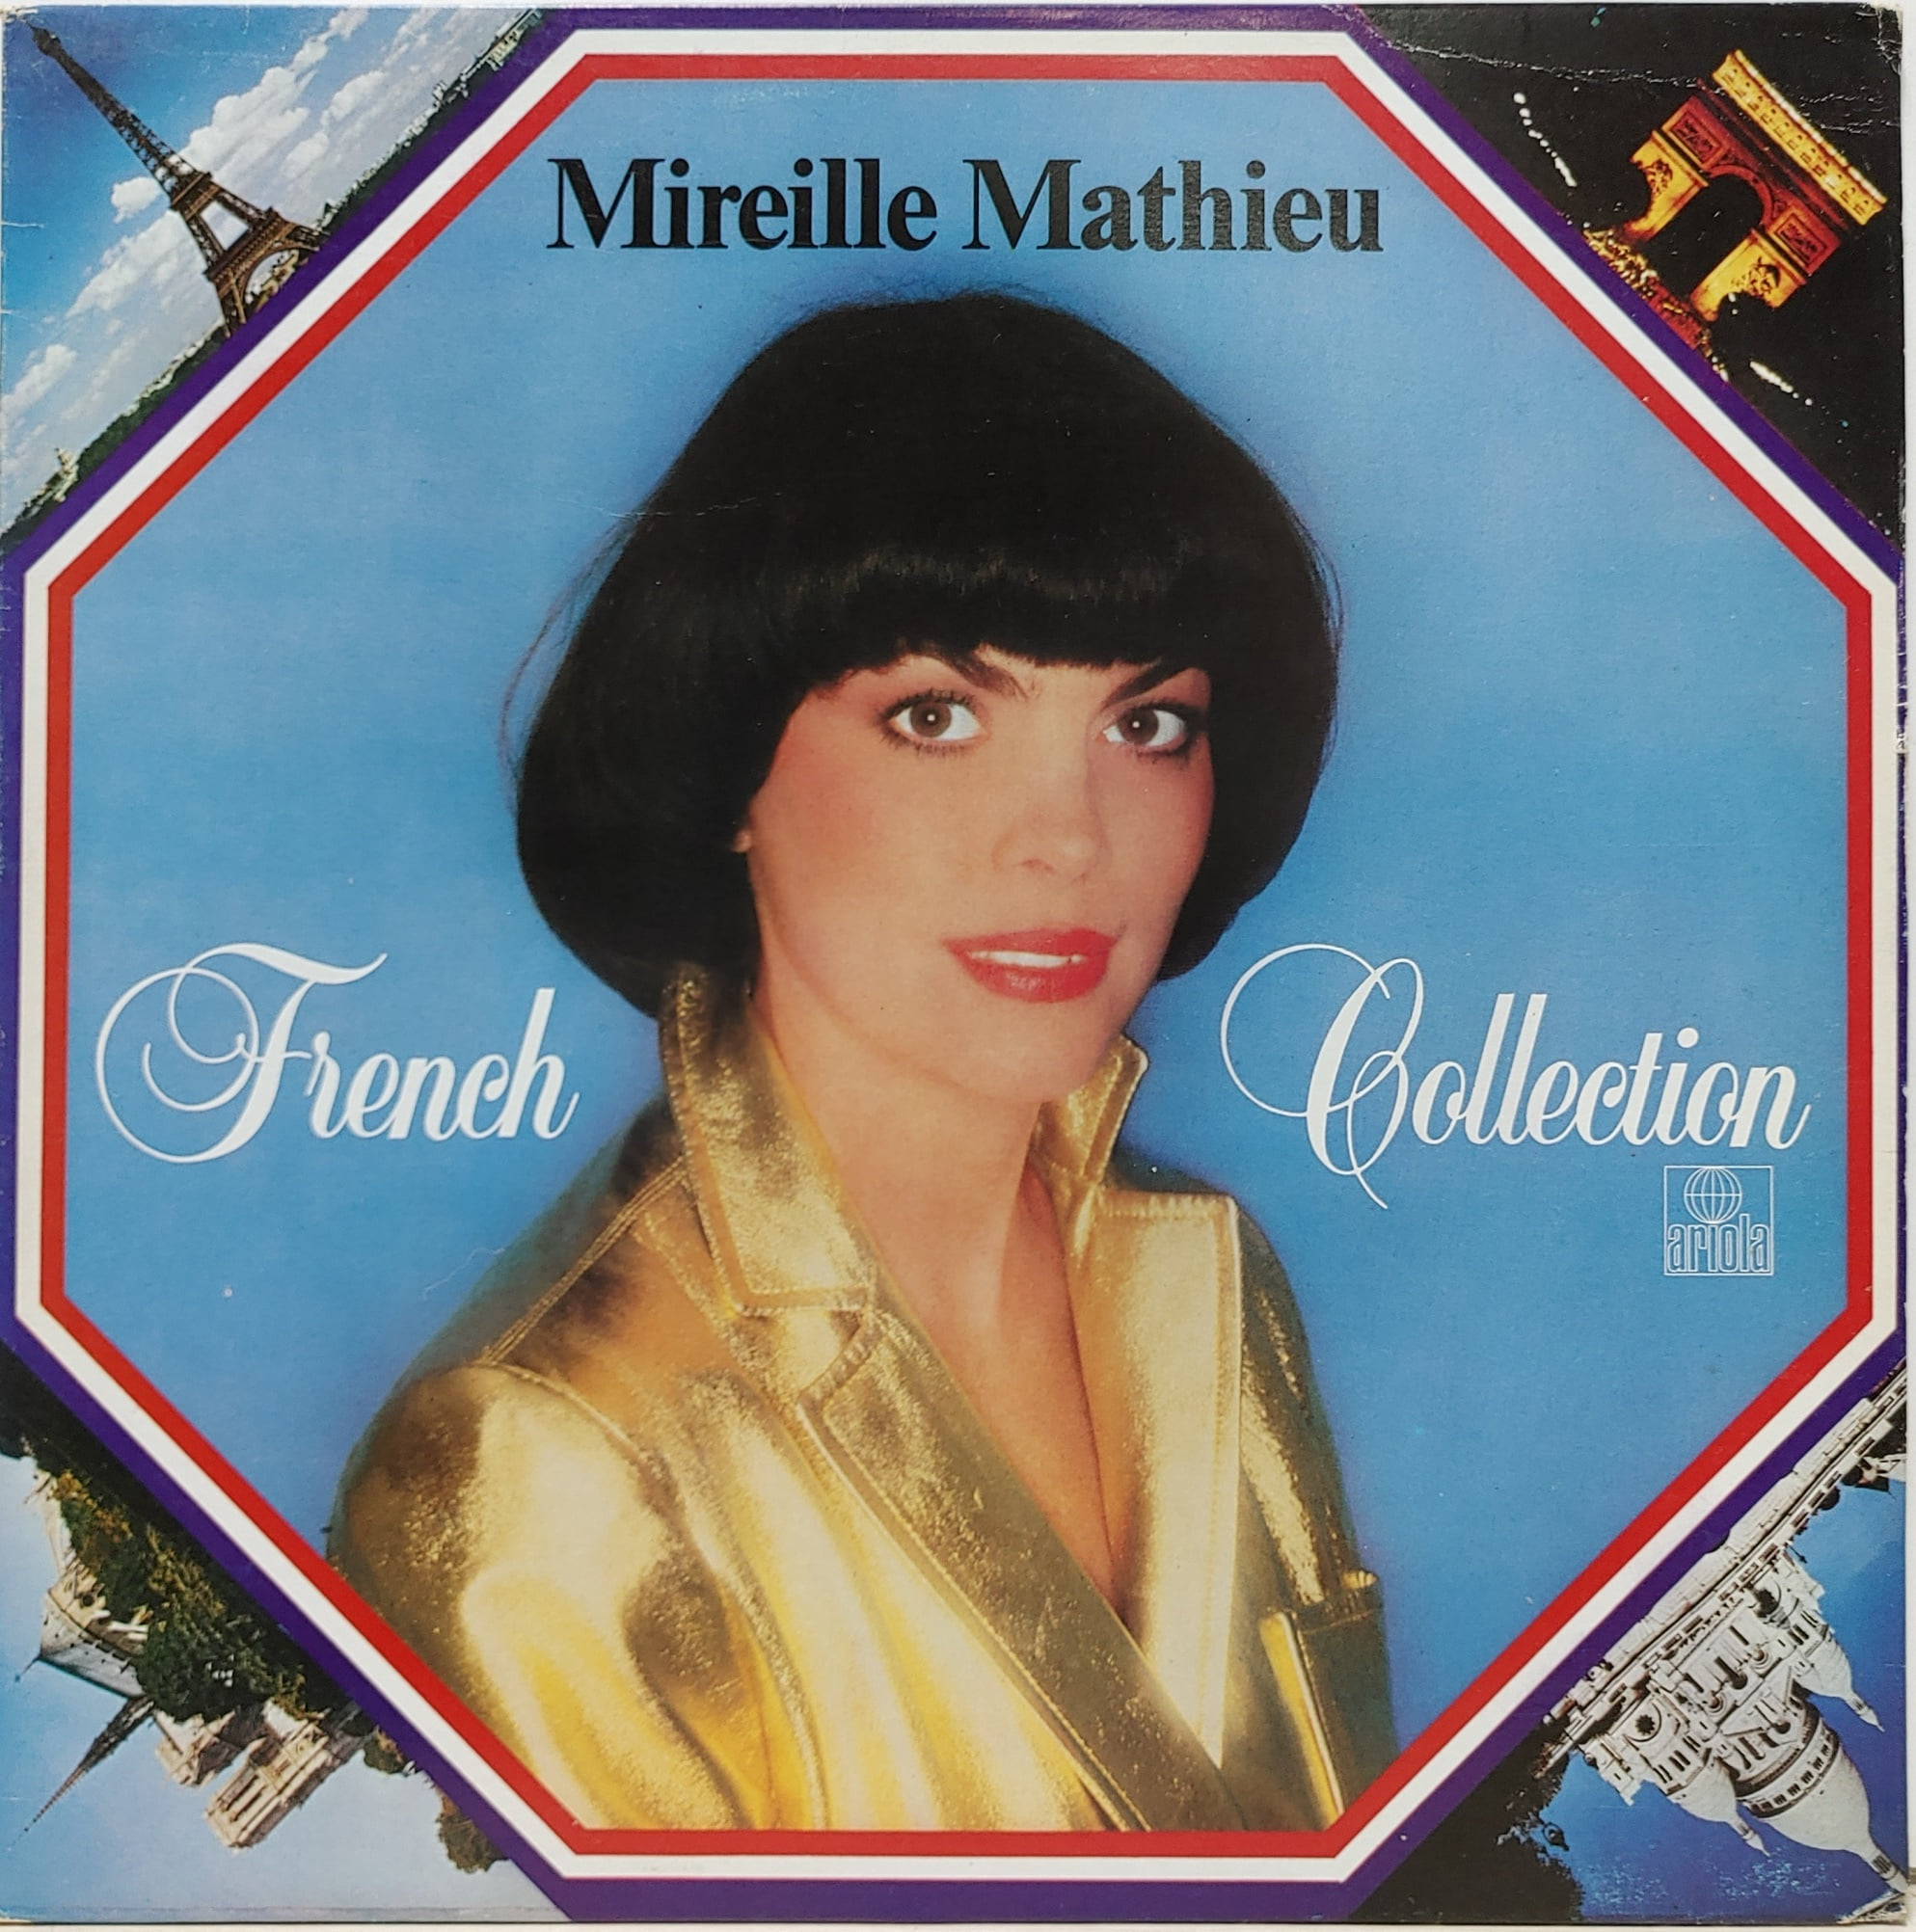 Mireille Mathieu / FRENCH COLLECTION